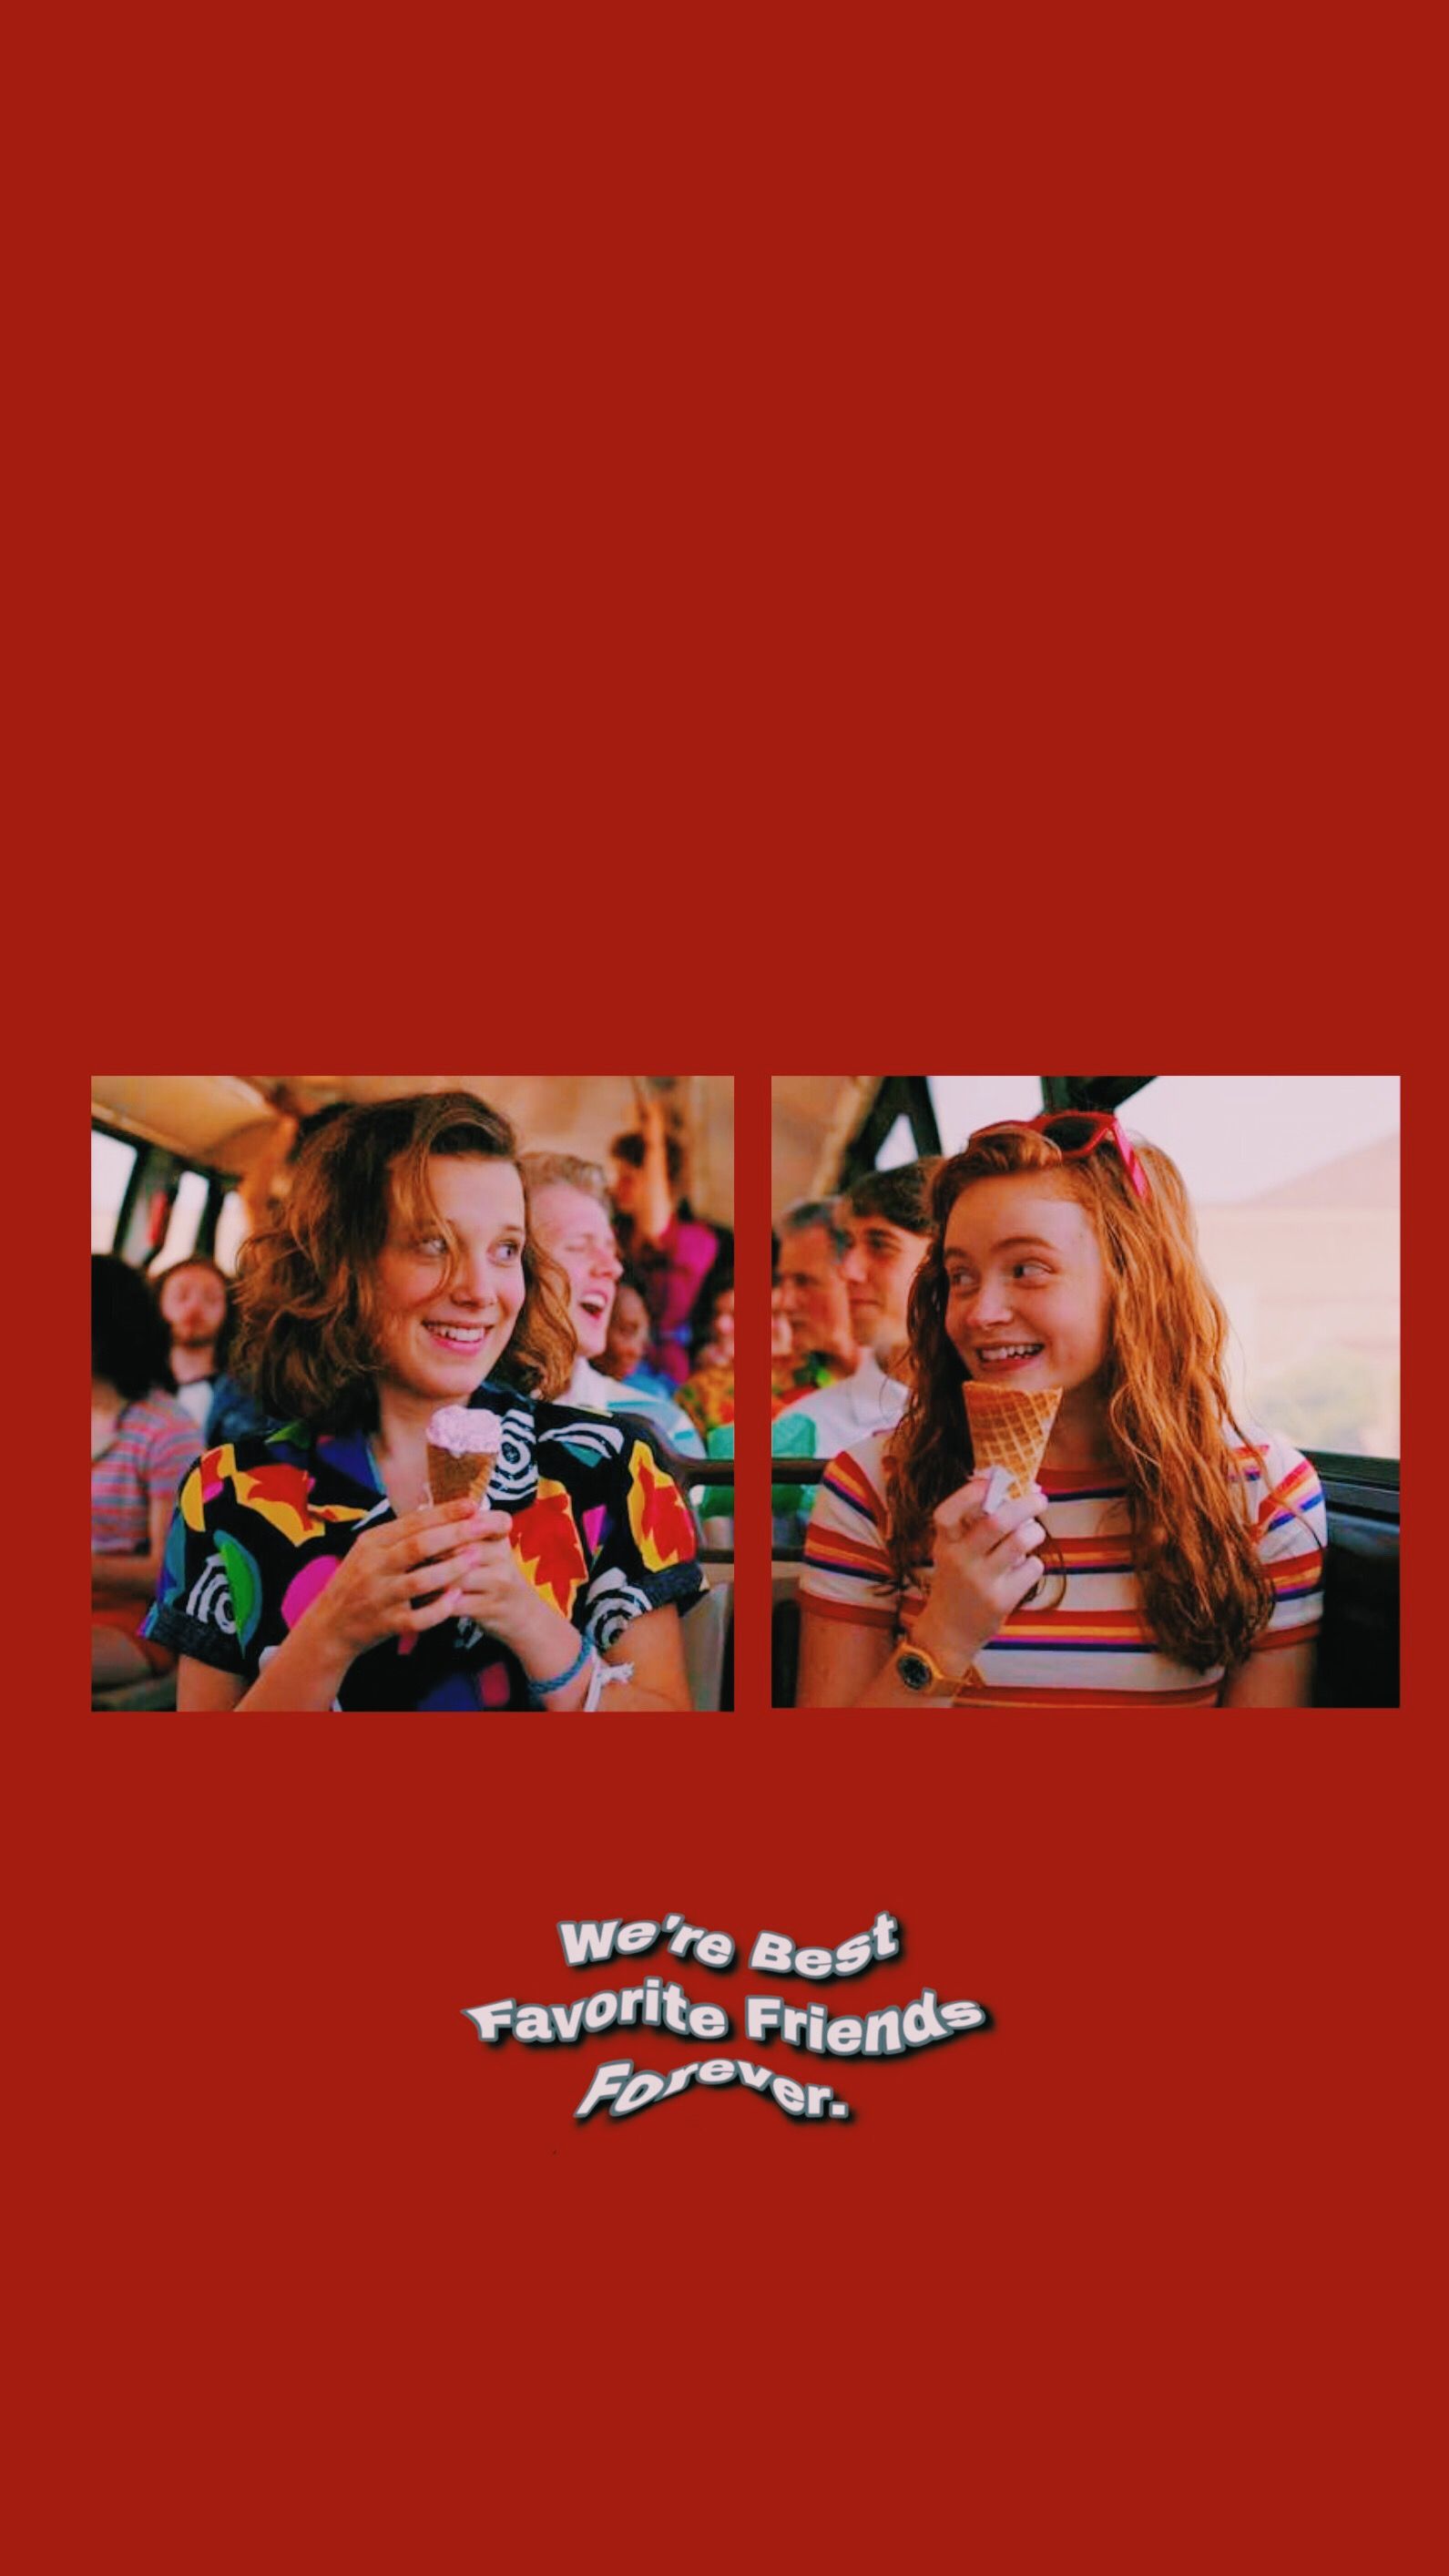 Max mayfield and eleven hopper wallpaper dearfinnwolfhard â instagram photos and videos stranger things quote stranger things stranger things wallpaper